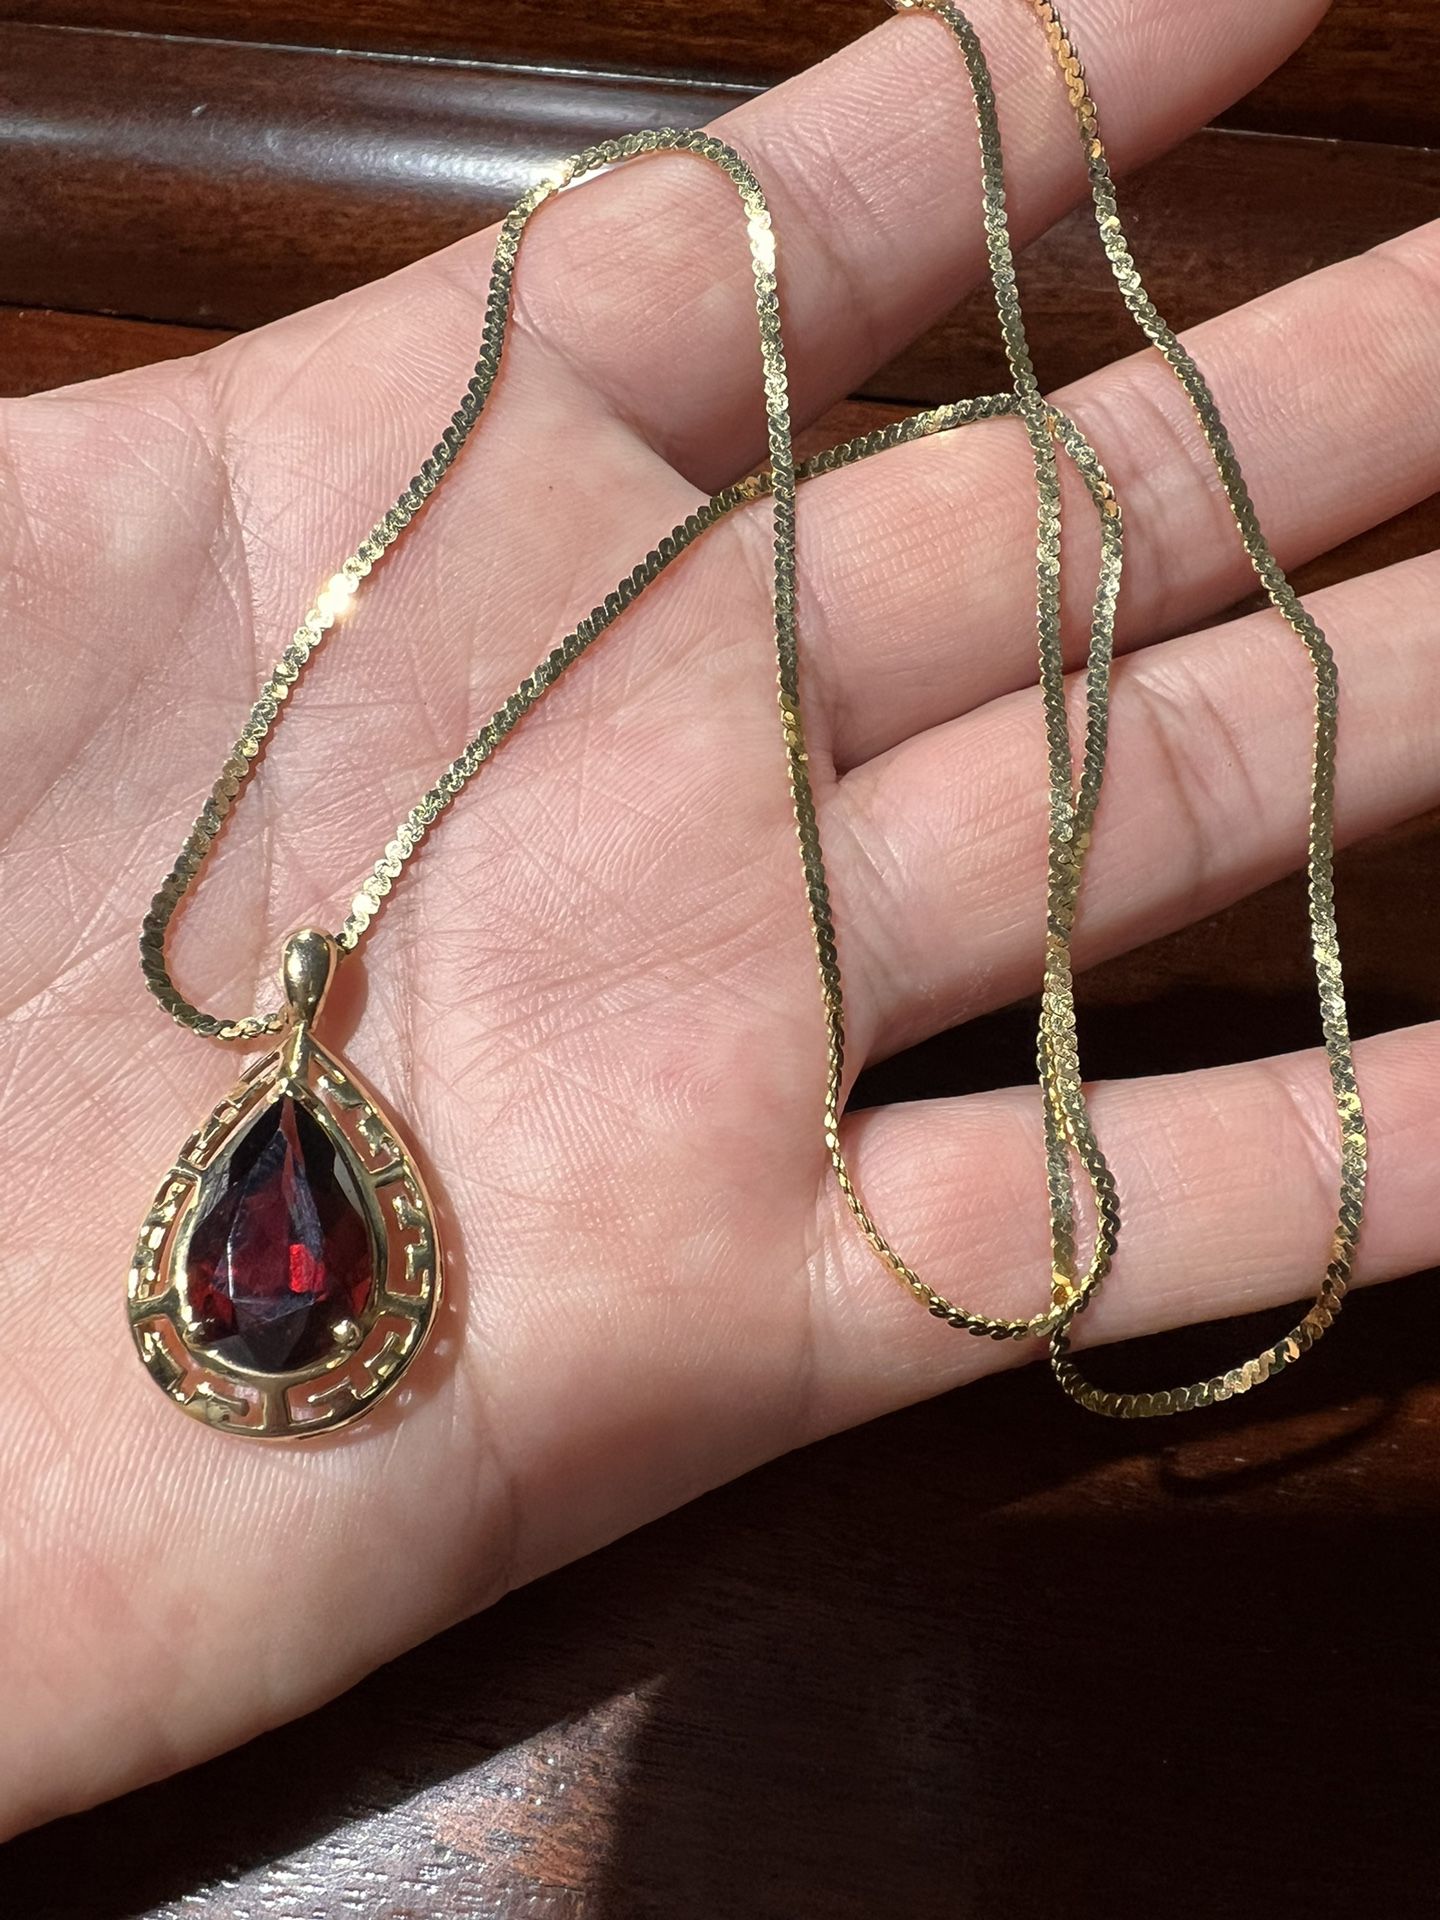 SOLID 10K YELLOW GOLD NECKLACE AND PENDANT GARNET 